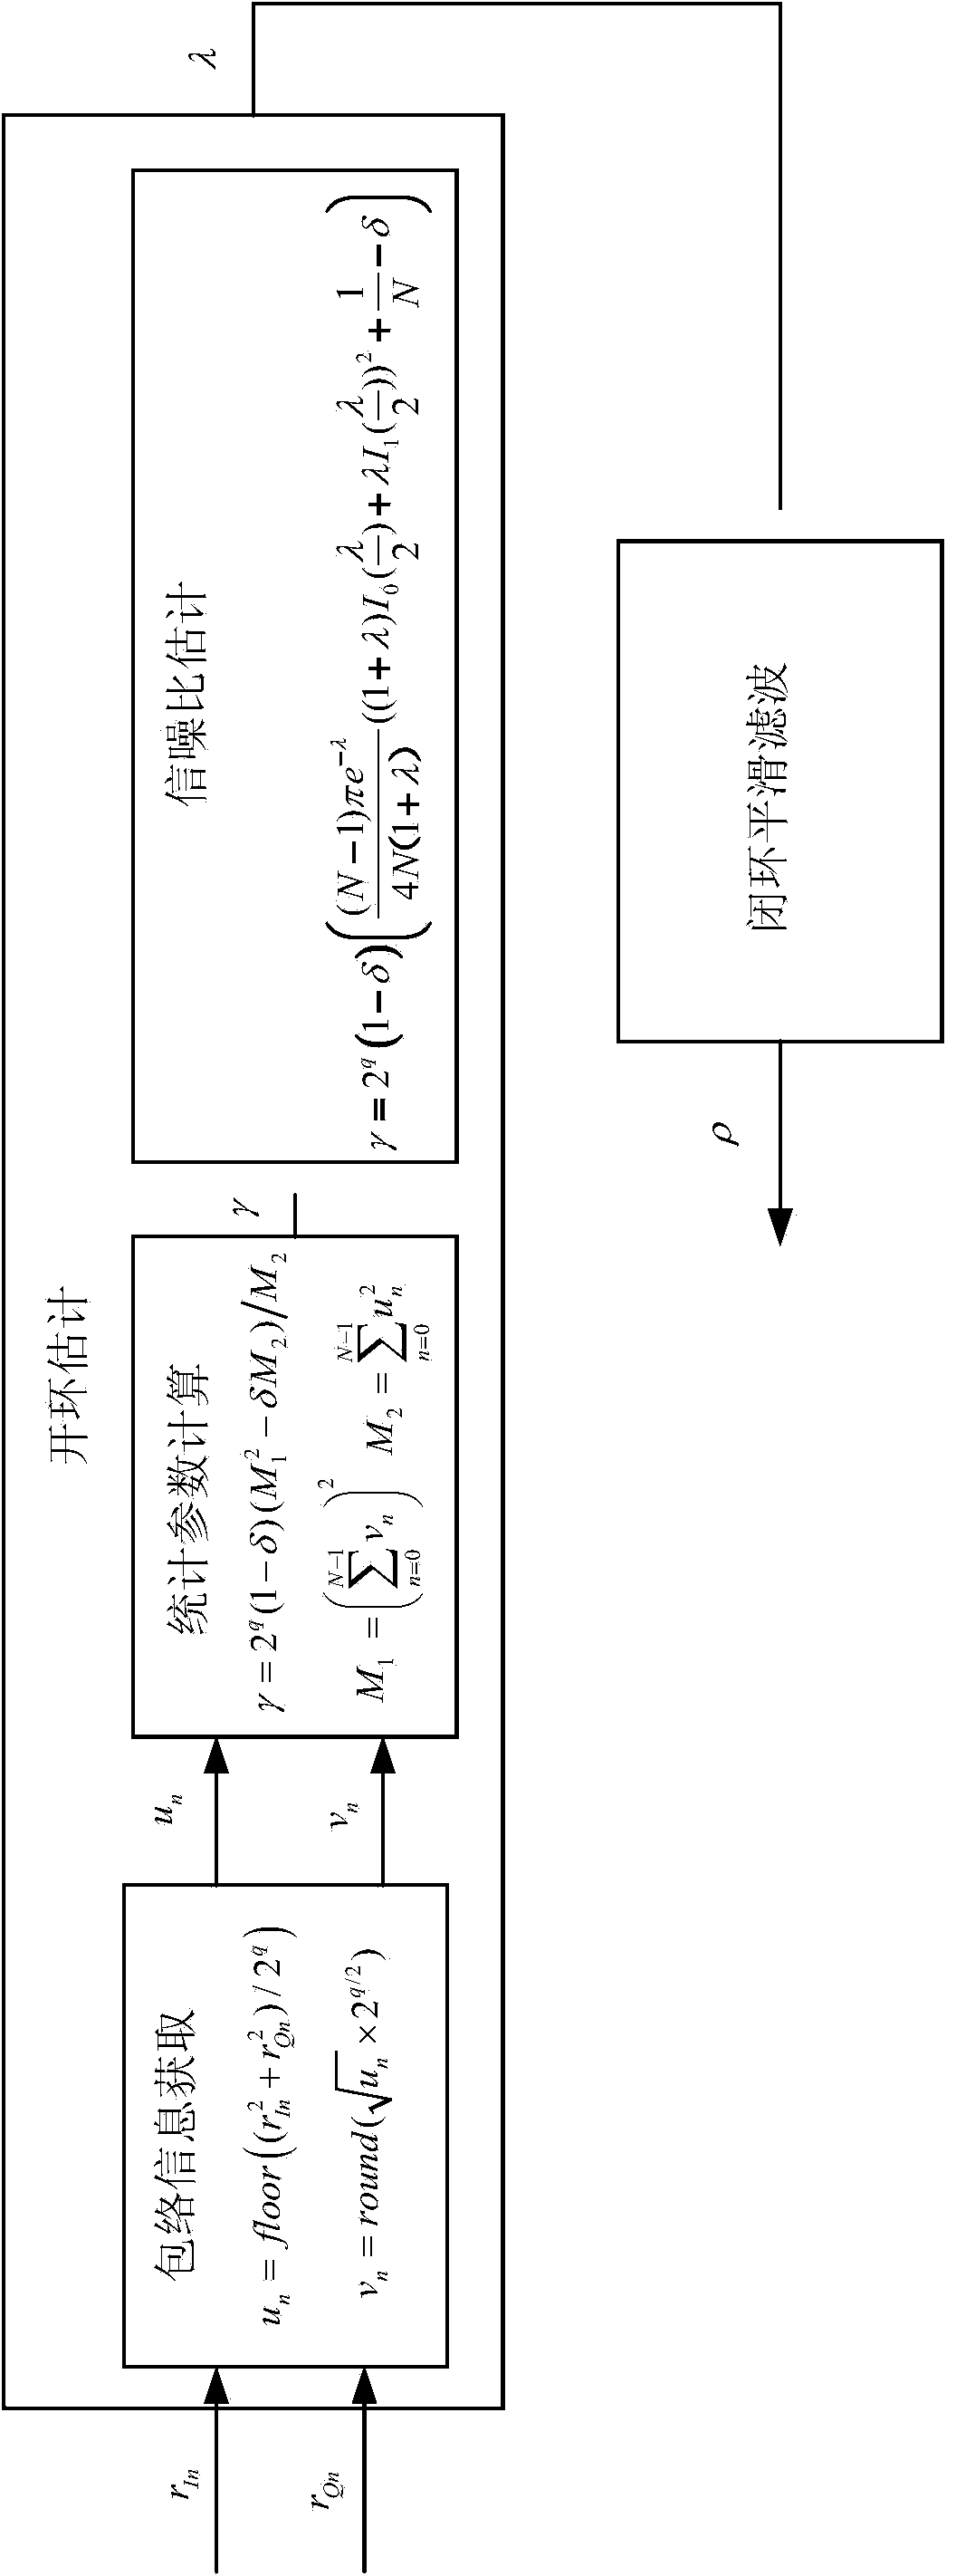 Non-data auxiliary SNR estimation method for open loop and closed loop combined MPSK signals